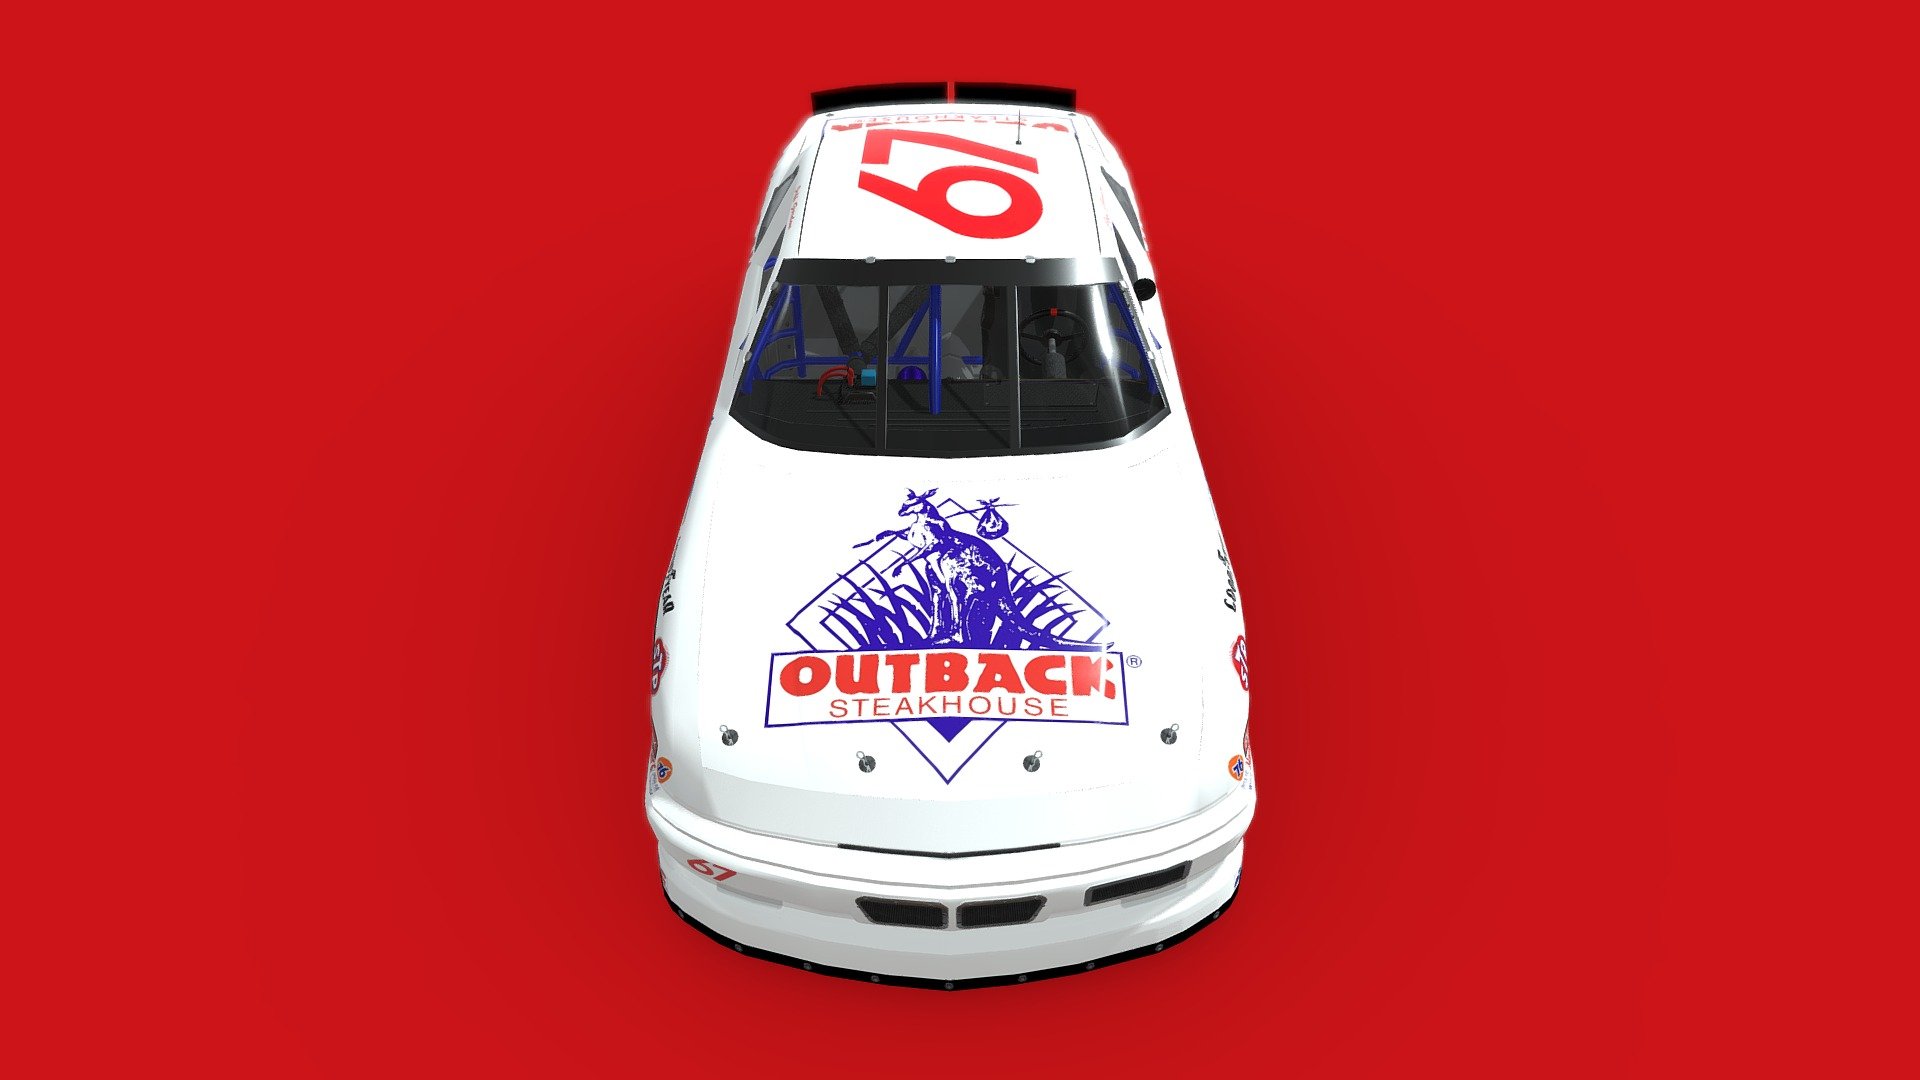 Inspired by the vanilla white Pontiac that Jeff Gordon drove during his first Busch Series start at Rockingham Speedway in 1990.

Constructed in modular parts, ready for games and other interactive content. Textured in layers, toggle debris on and off. Modeled and unwrapped with Maya, textured in Substance Painter 3d model